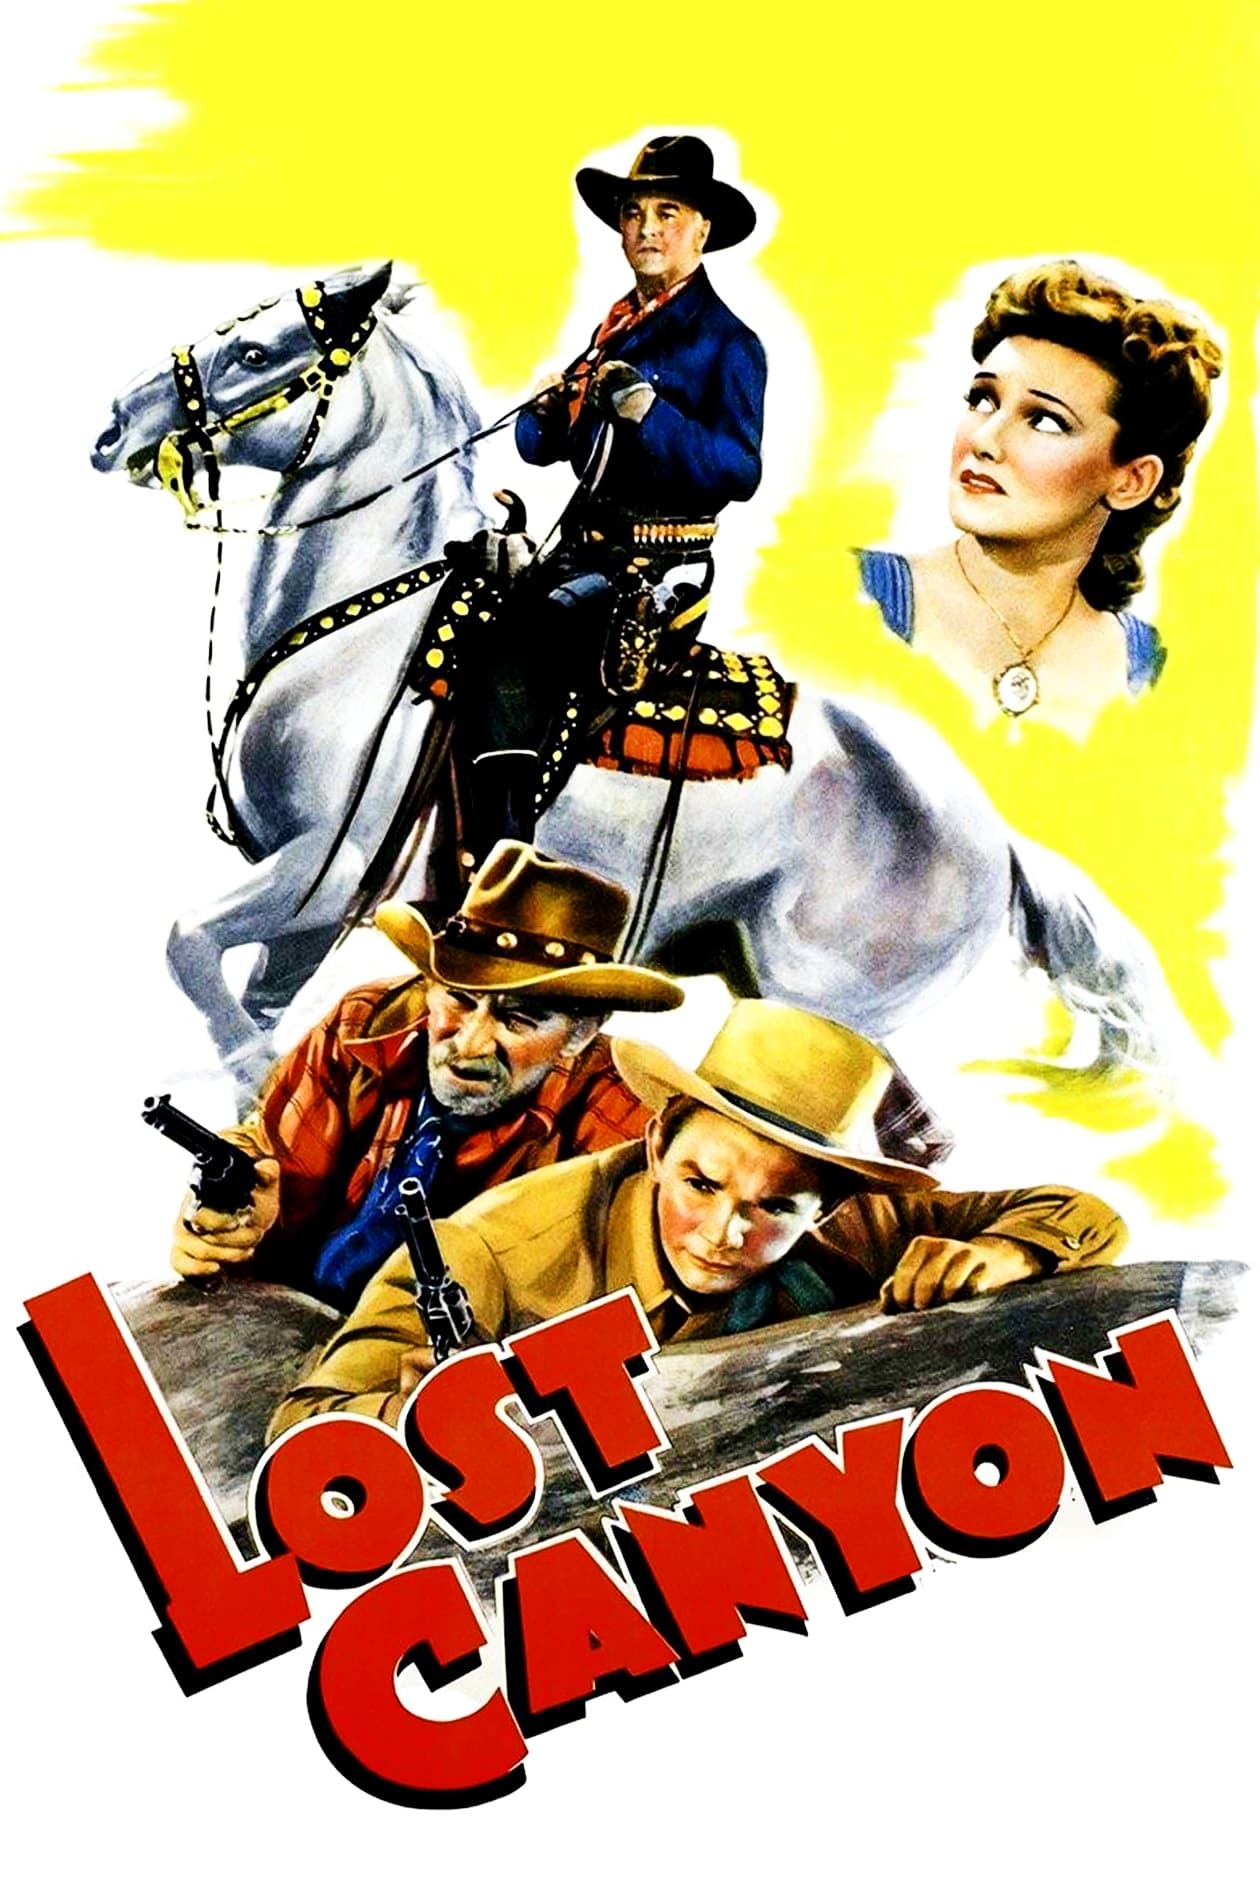 Lost Canyon (1942)